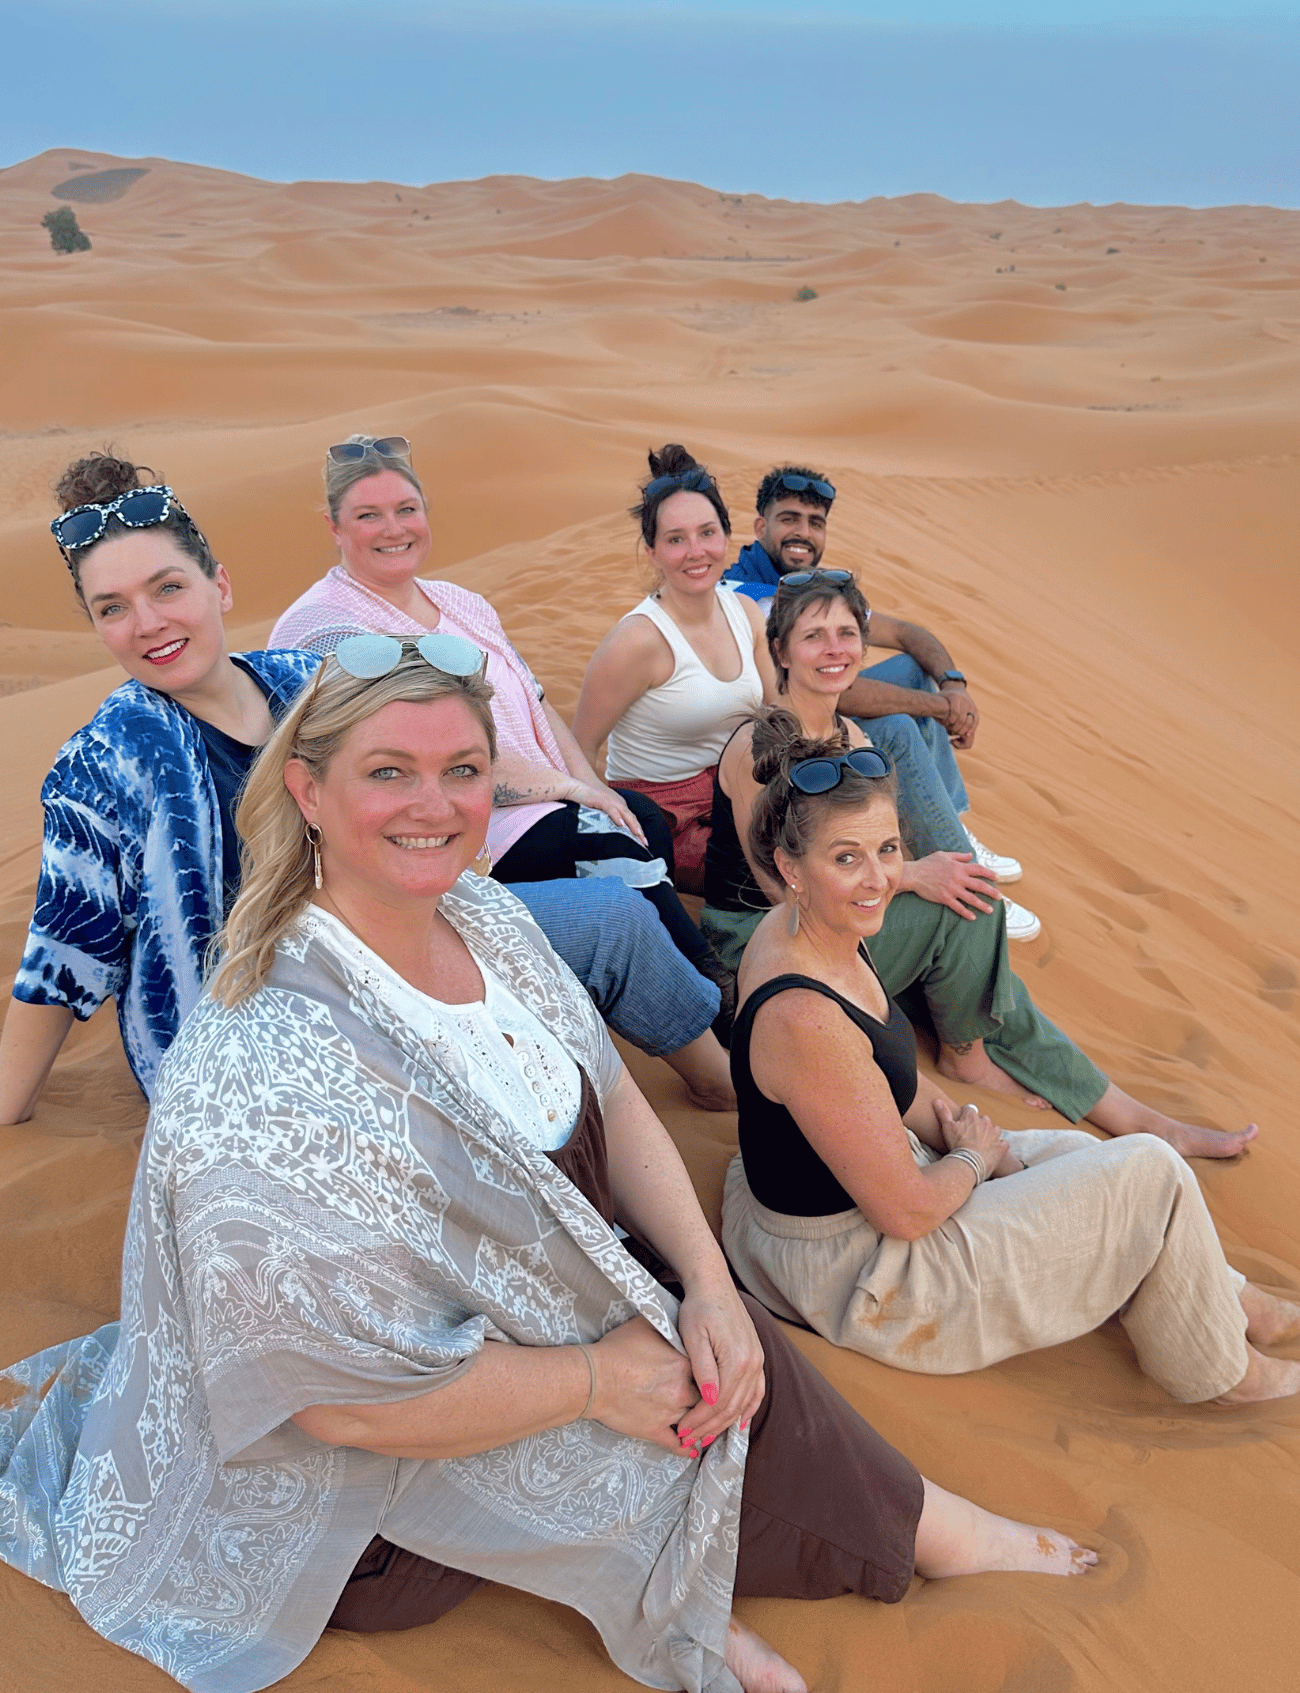 Discover the beauty of Morocco on a 10-day adventure, exploring Marrakech, the Sahara Desert, and more.